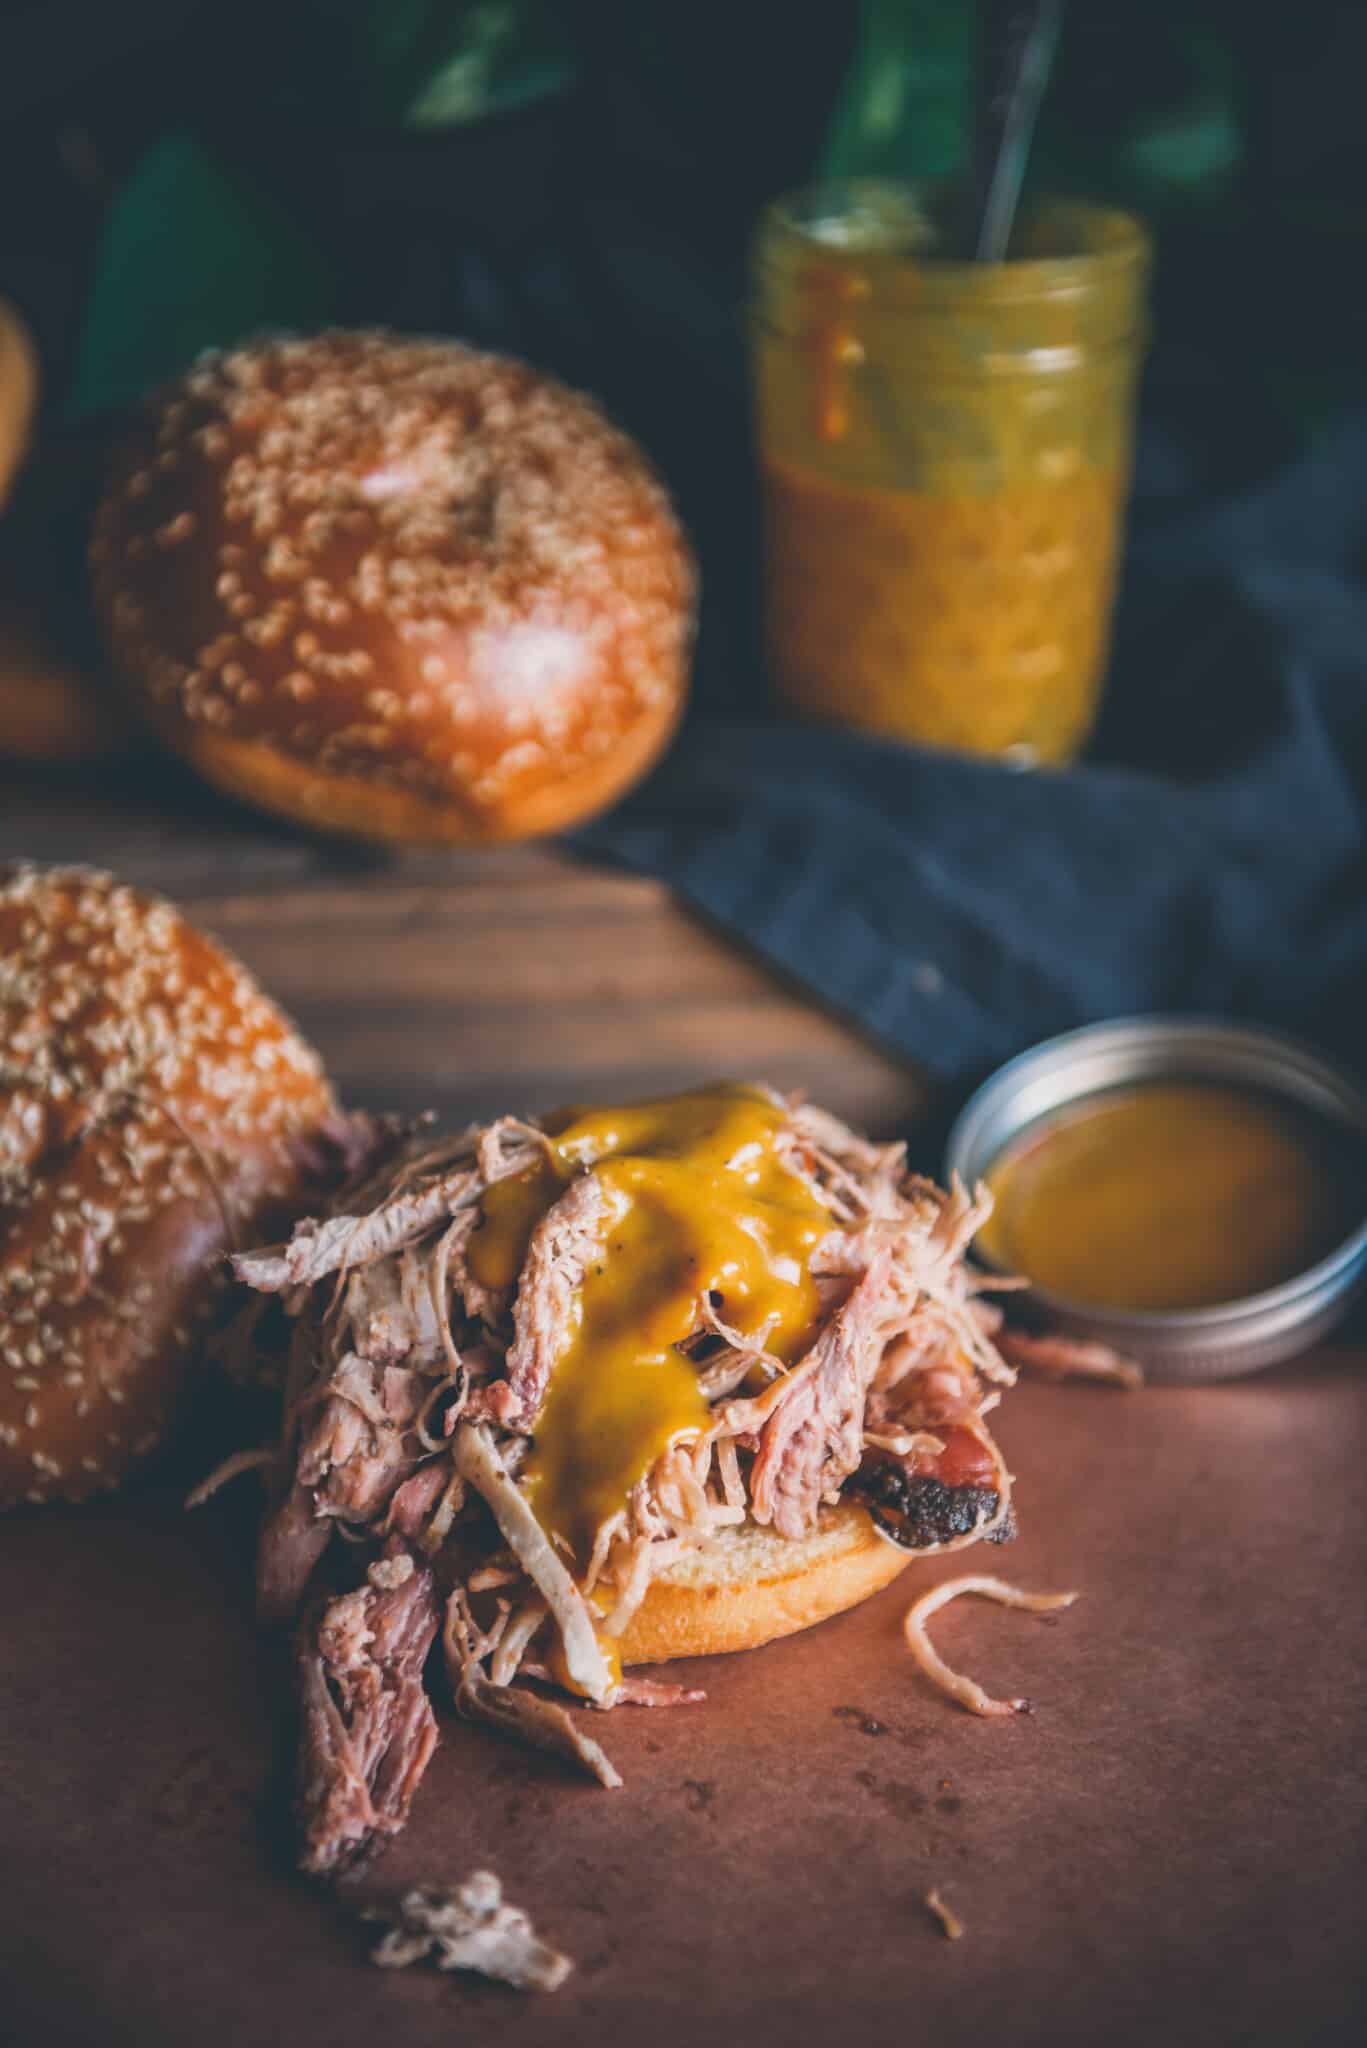 Close up of yellow mustard based sauce on a pile of shredded pork on a bun. 